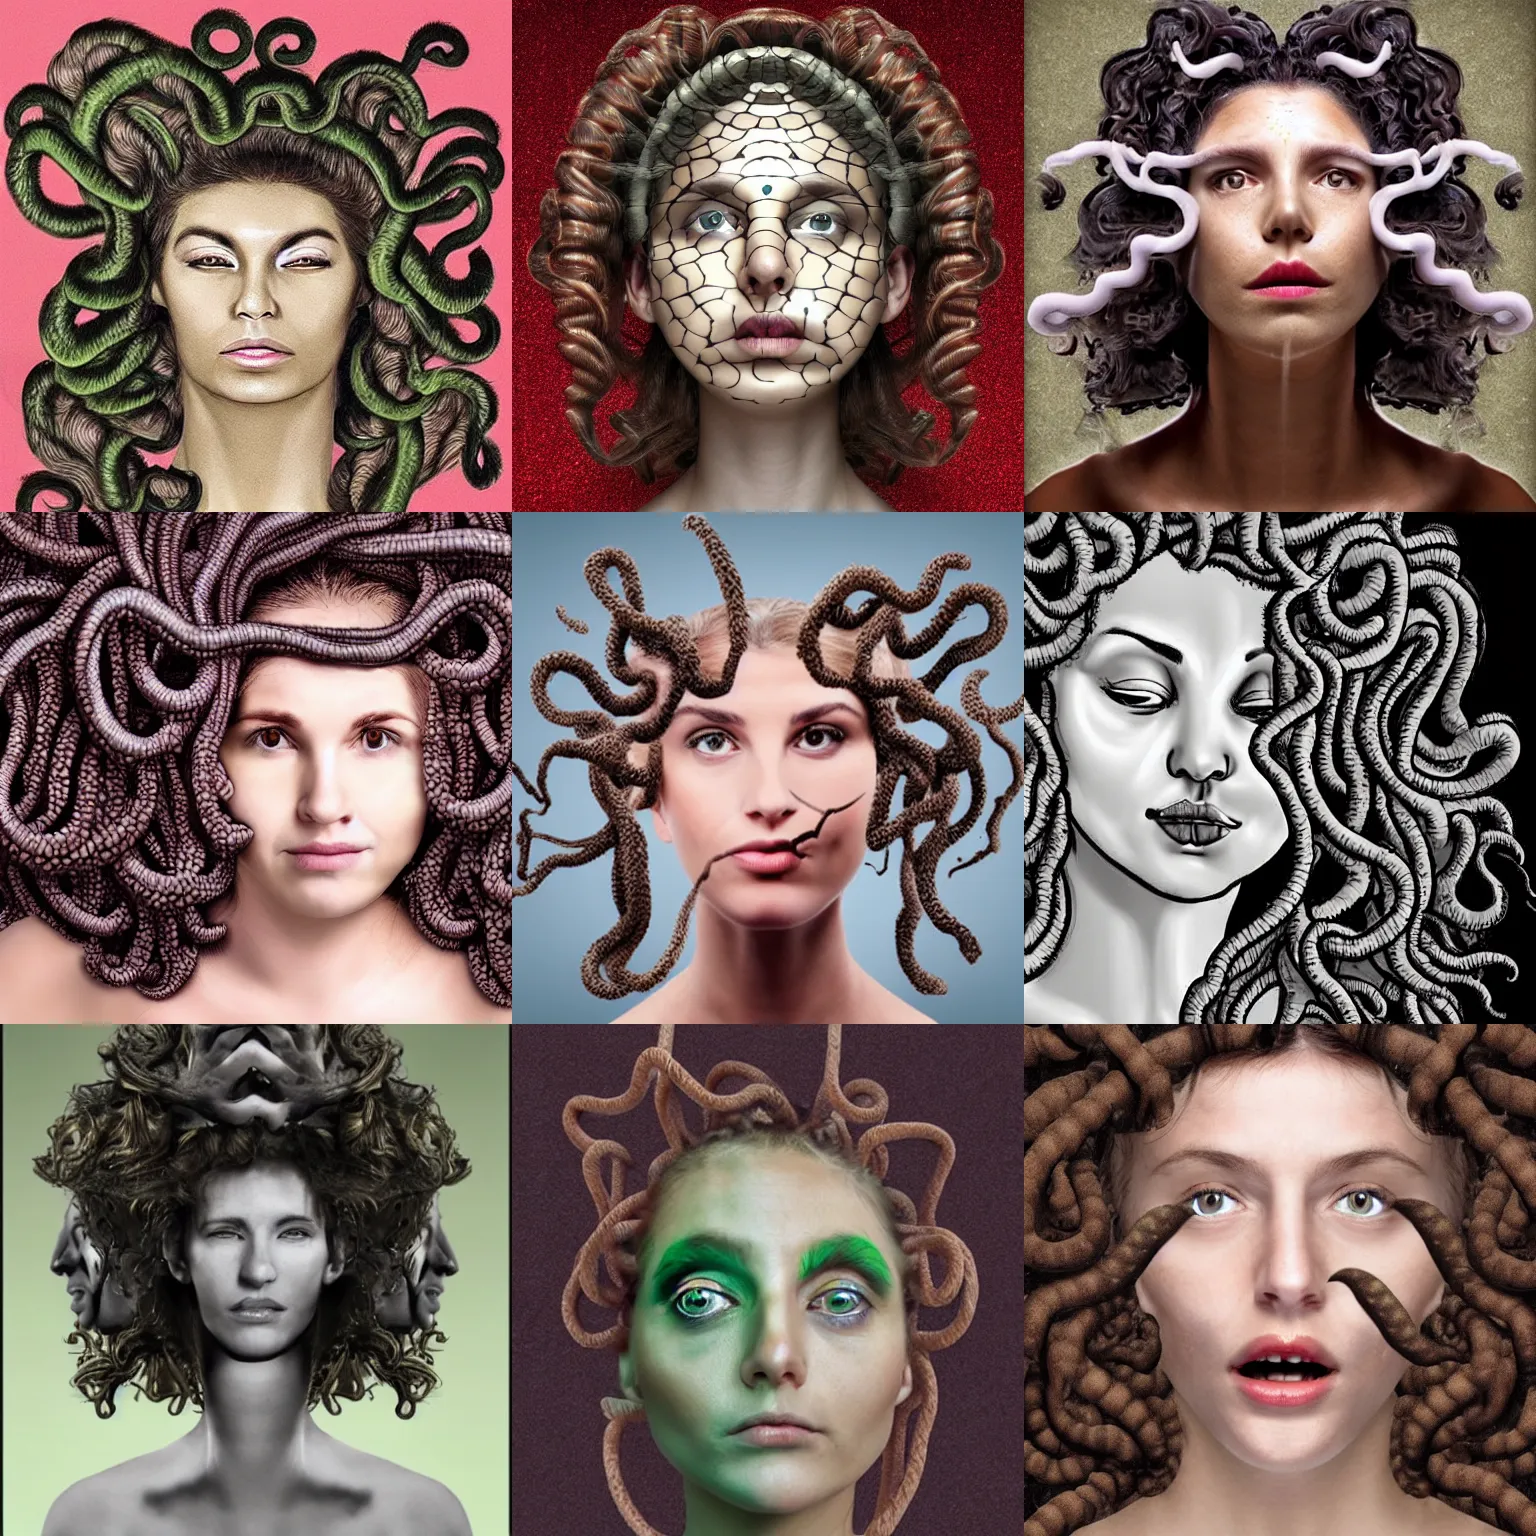 Prompt: Woman morphed into a Medusa